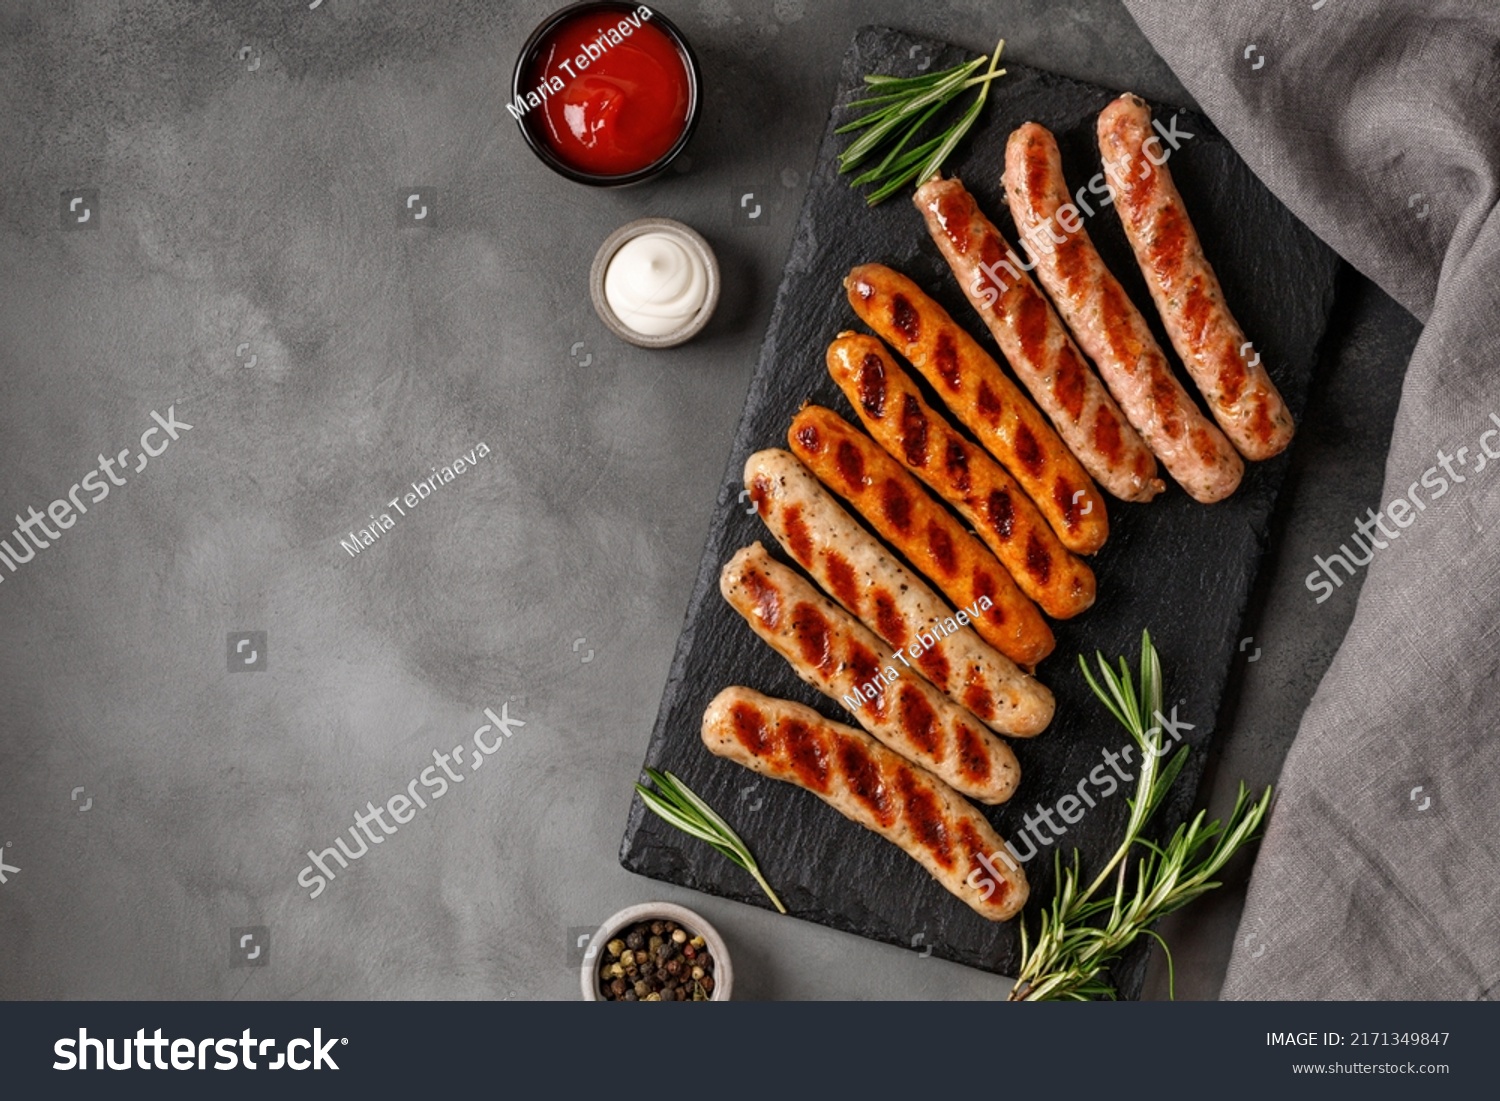 Assorted grilled sausages on barbecue with sauces. Assortment of different sausages on slate board and dark background. Top view, copy space. #2171349847